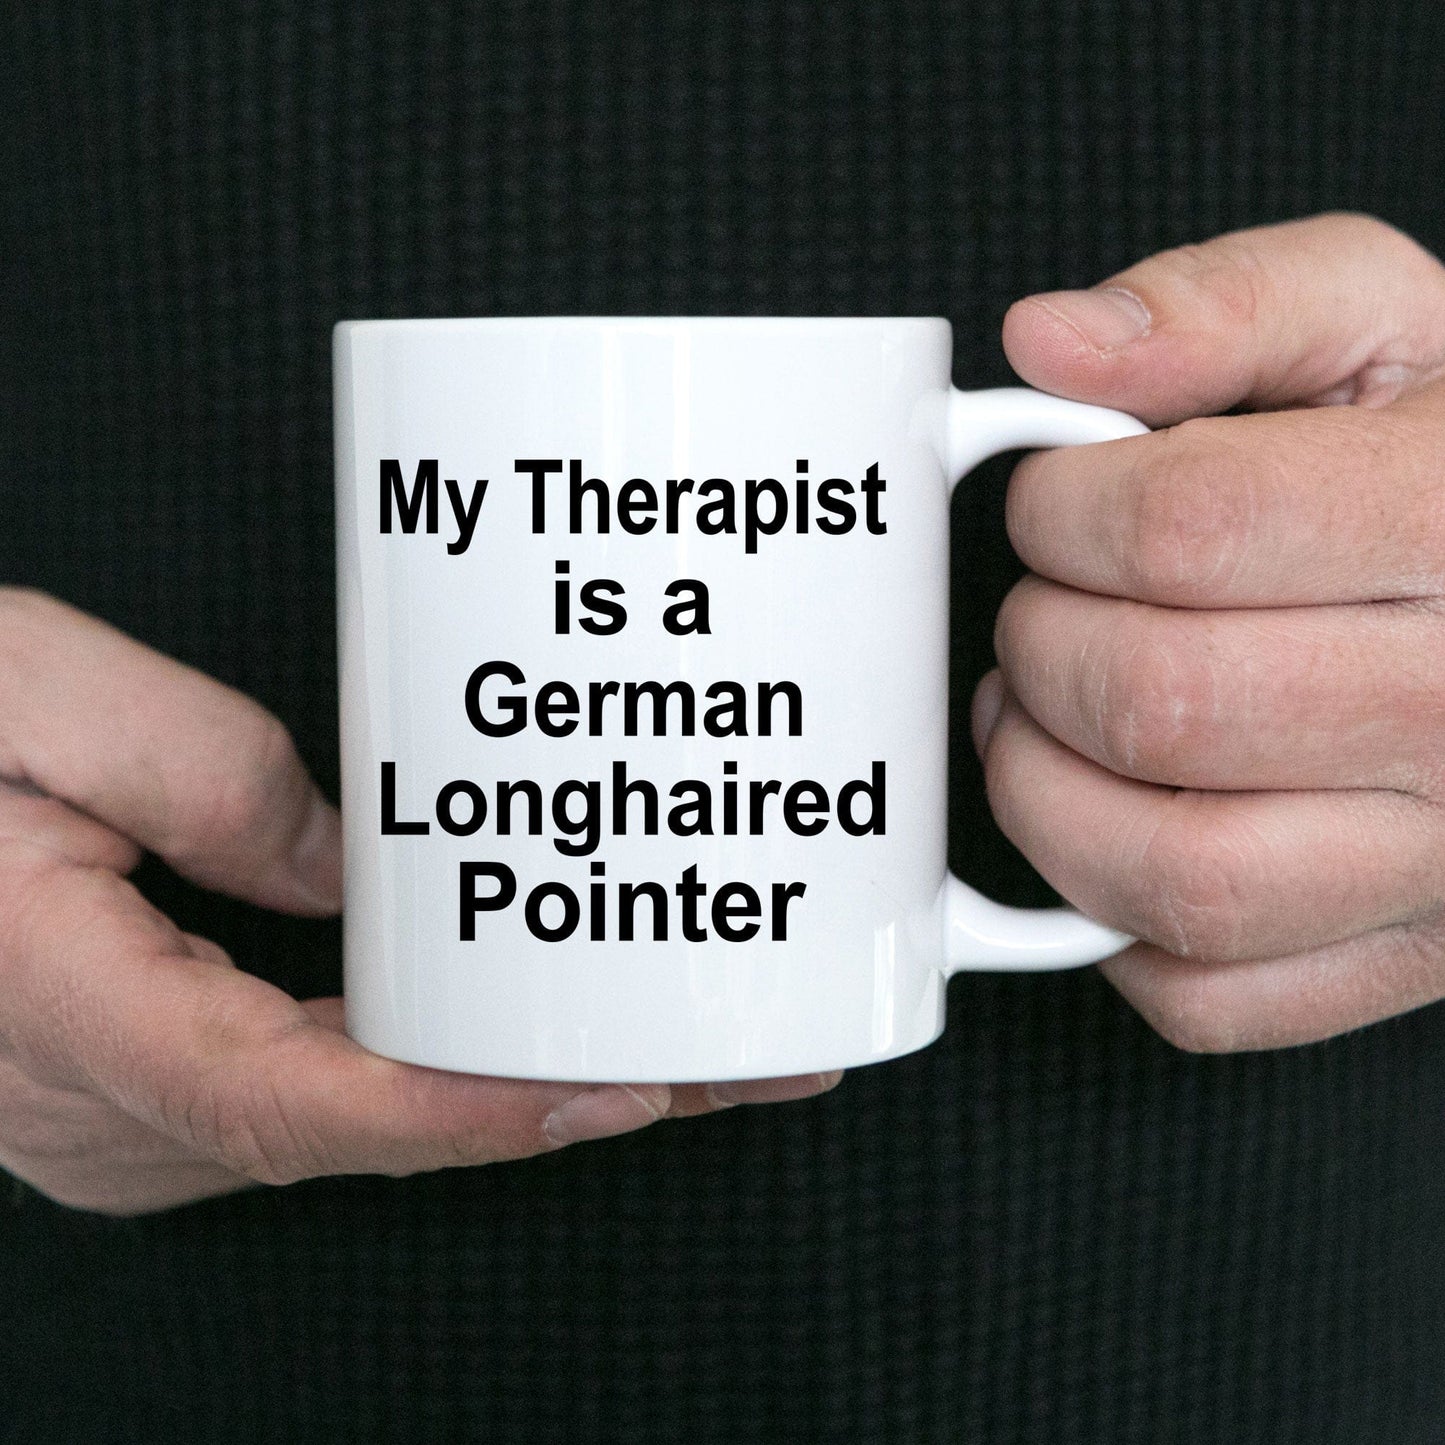 German Longhaired Pointer Dog Owner Lover Funny Gift Therapist White Ceramic Coffee Mug